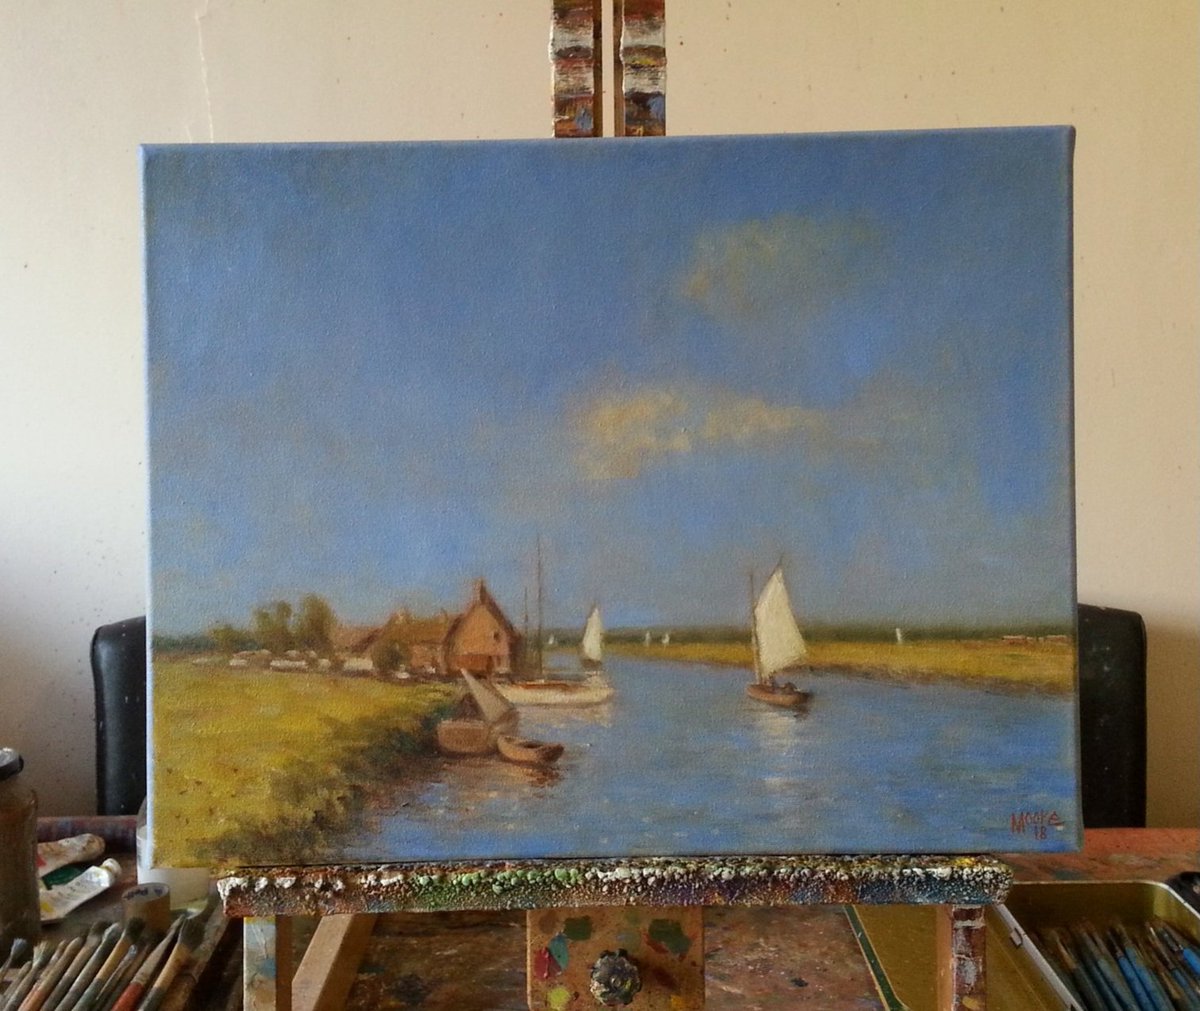 Summer on the Norfolk Broads after Seago 
Oil painting